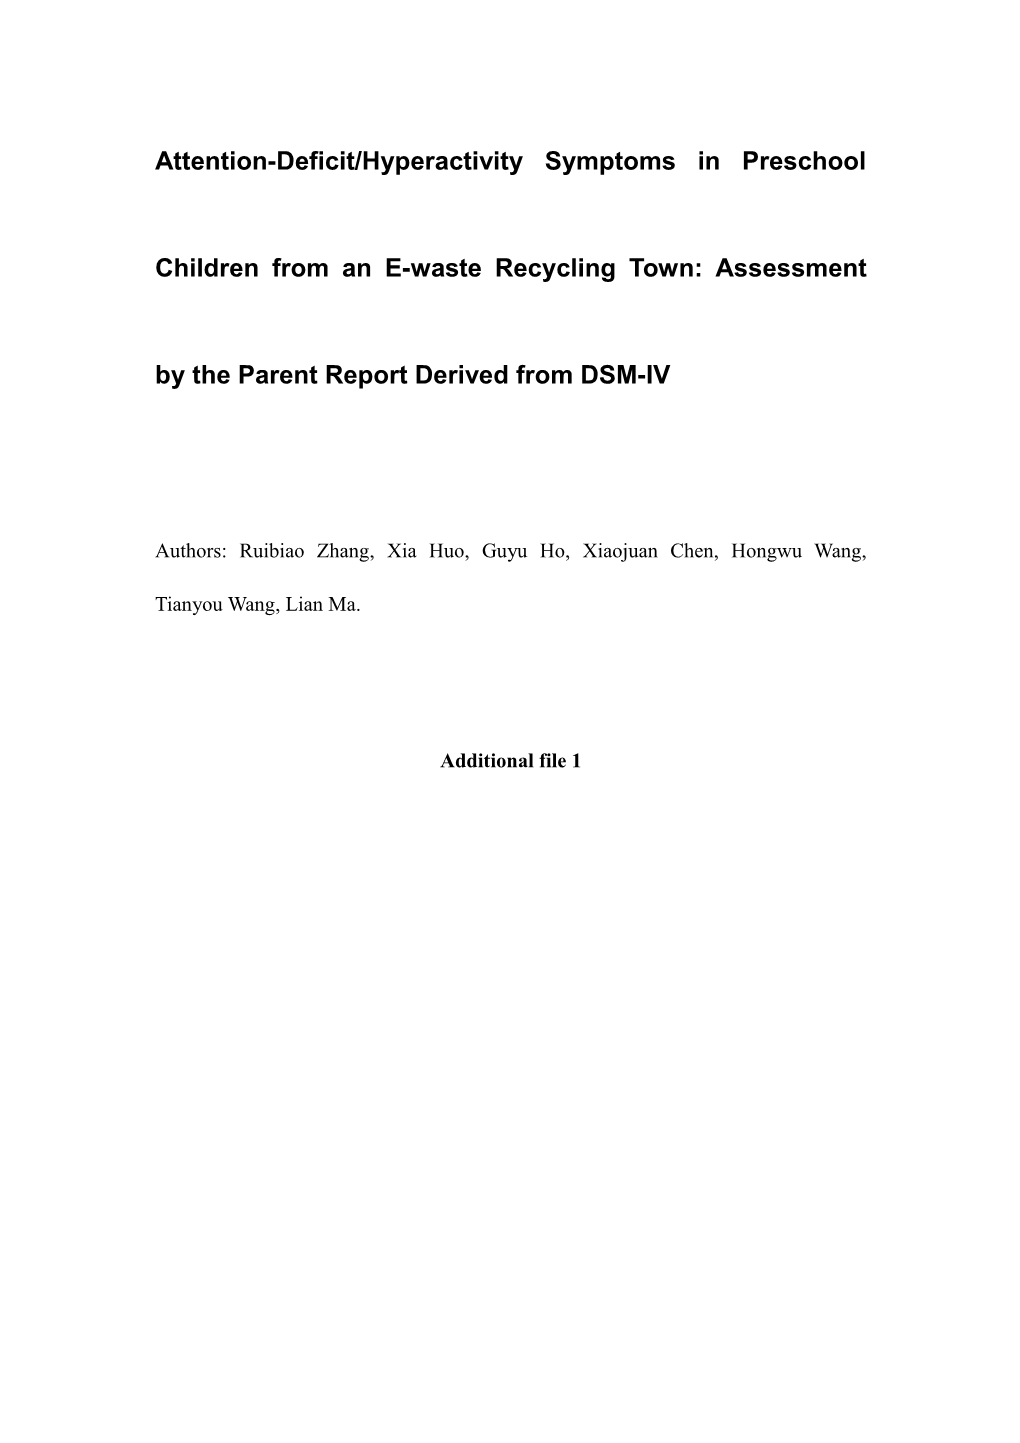 Attention-Deficit/Hyperactivity Symptoms in Preschool Children from an E-Waste Recycling